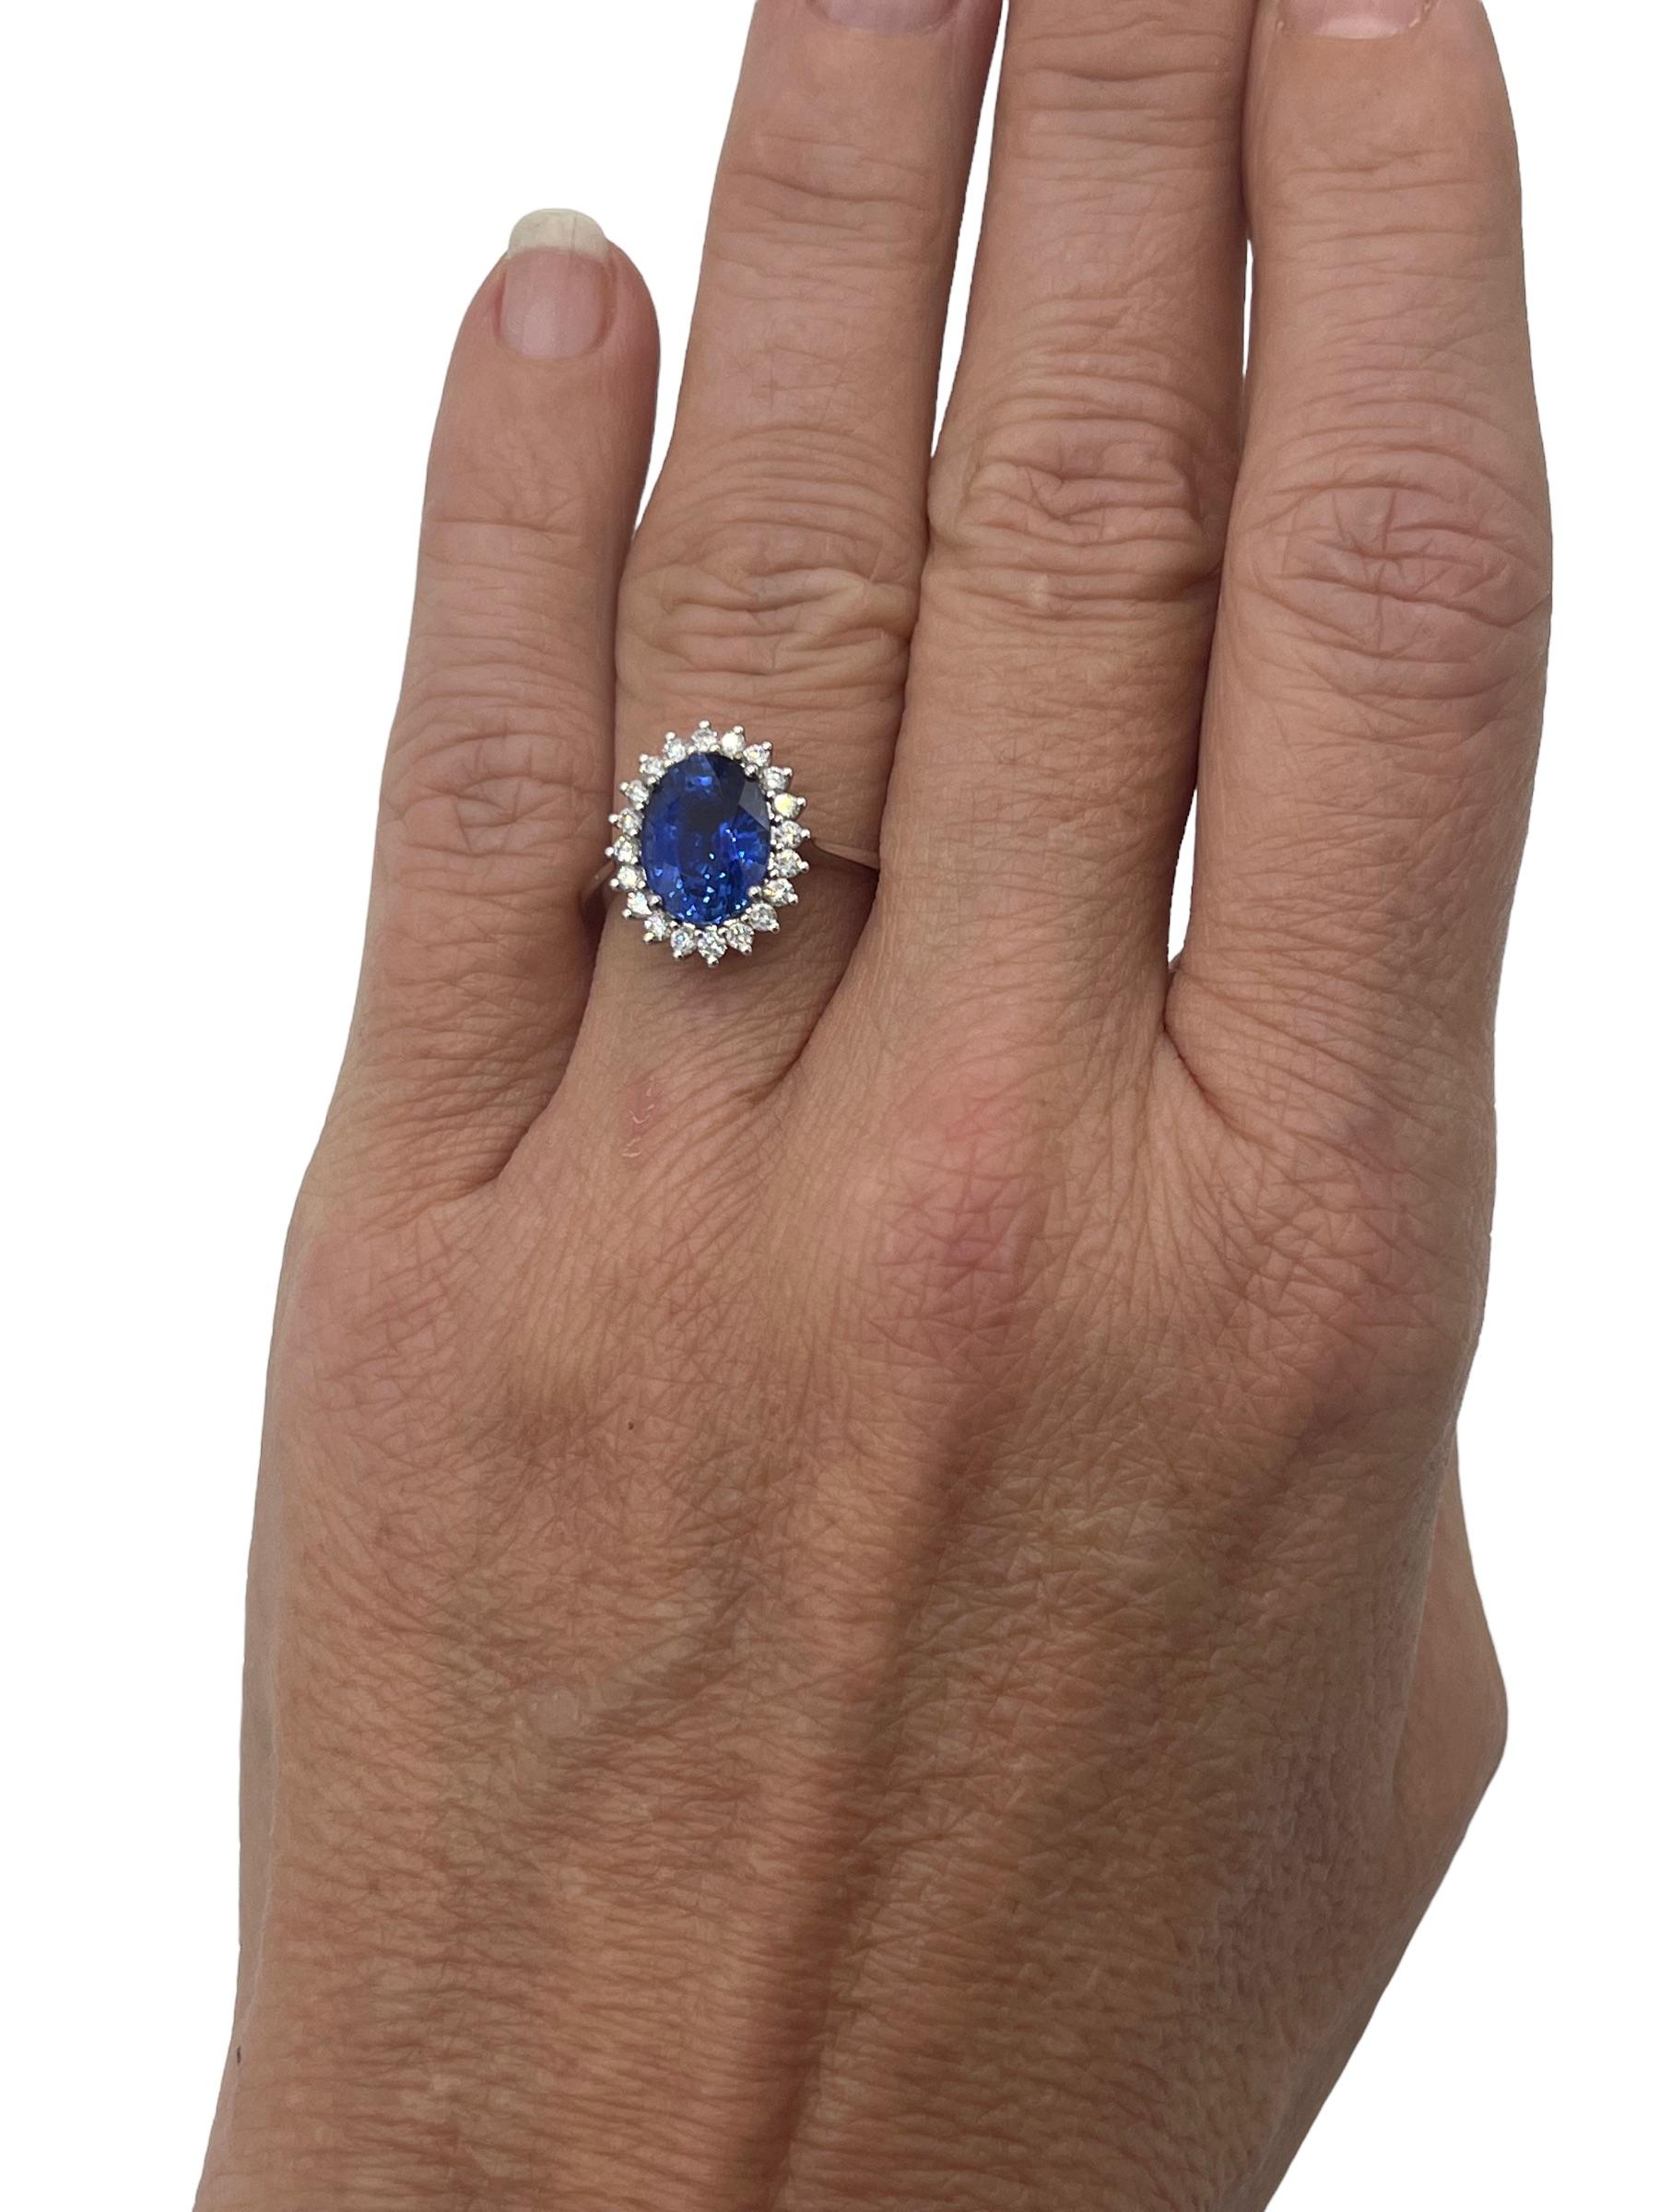 Oval Cut Engagement Ring 18 Carat Gold Set with a Certified Natural Sapphire 3.27 Carat